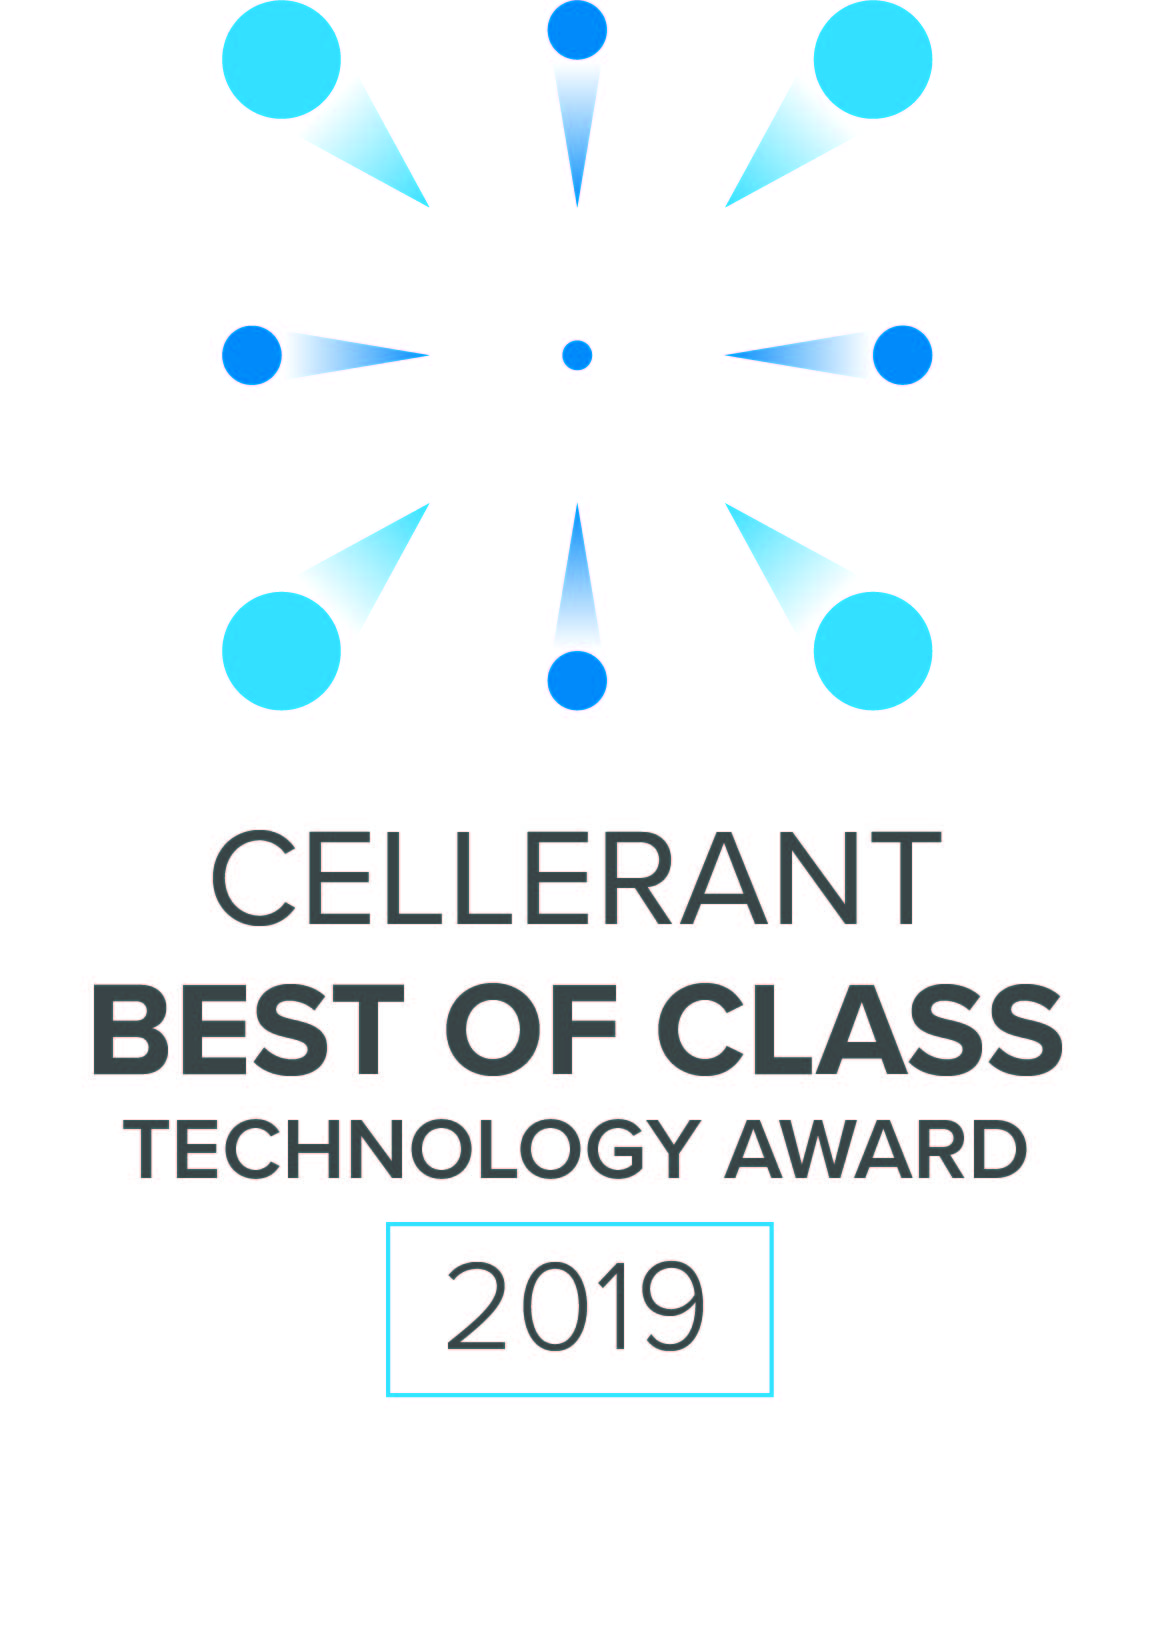 Patient Prism has been recognized as a 2019 Cellerant Best of Class Technology Award Winner